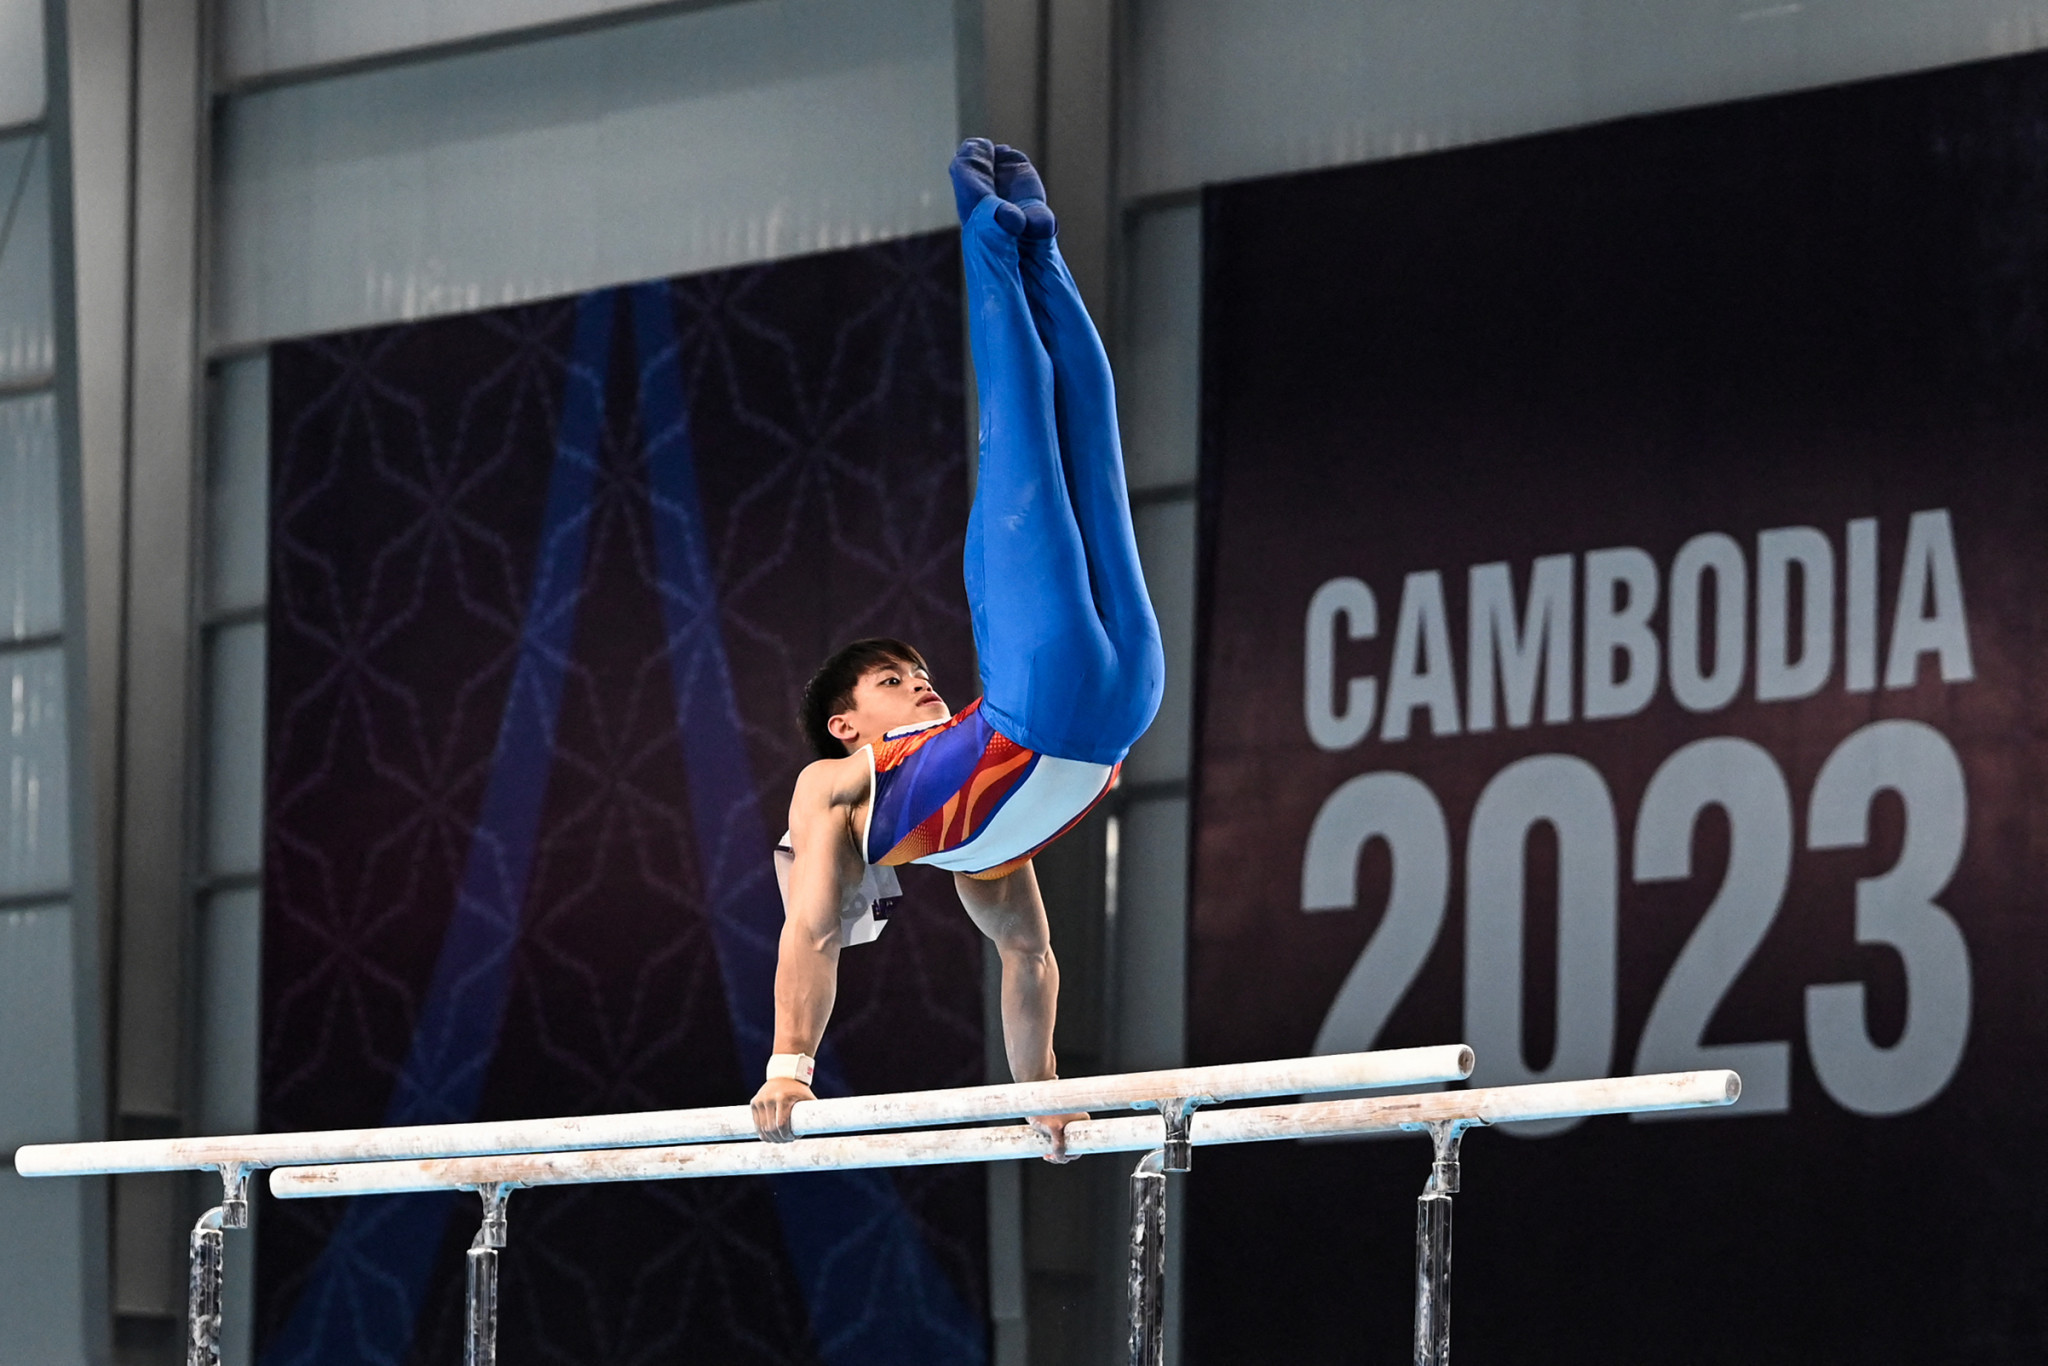 Yulo seals third consecutive all-around title at Southeast Asian Games